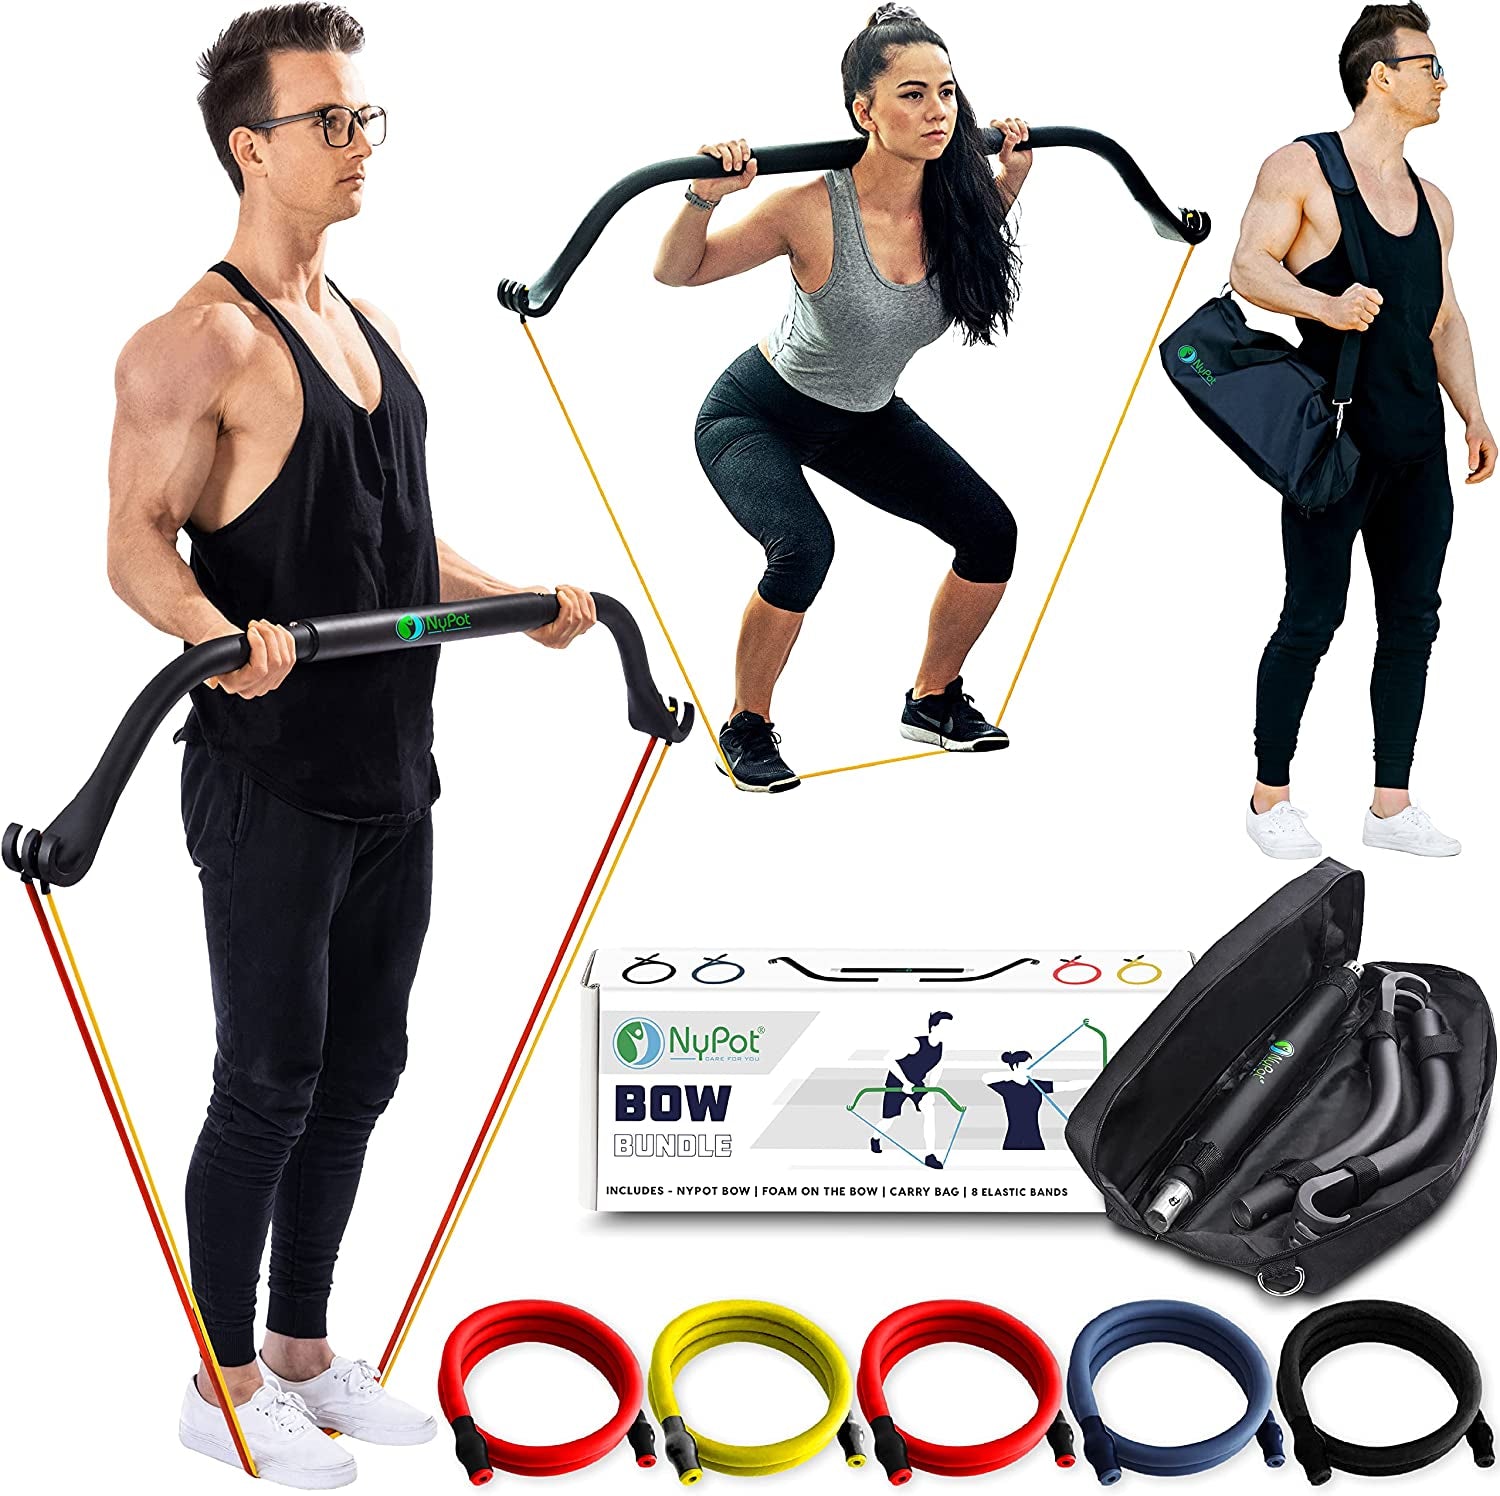 Premium Bow Portable Gym - at Home Workout Equipment Men and Women - Full Body Compact Home Gym & Home Workout Kit - Squat Resistance Bands with Bar - Travel Gym Work from Home Fitness Equipment